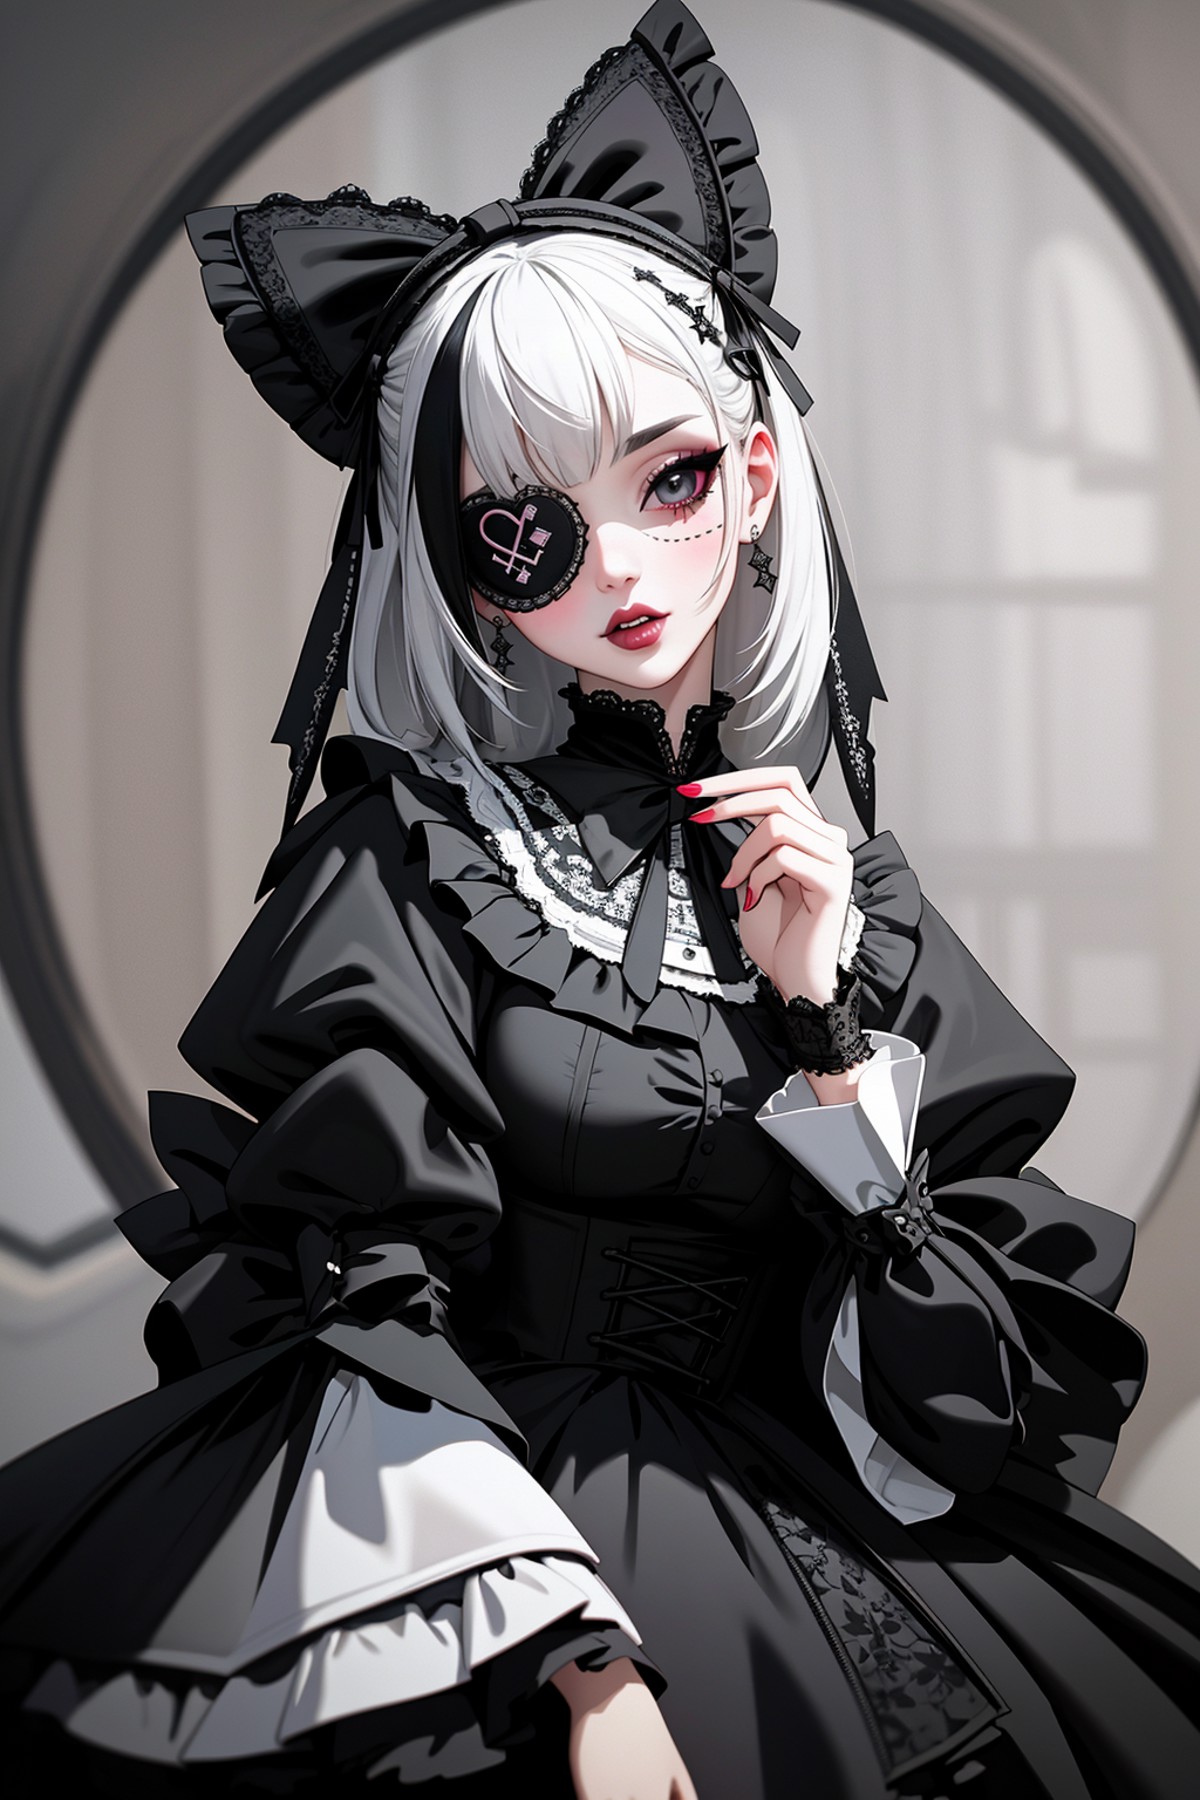 ((Masterpiece, best quality)), edgQuality,bimbo,glossy,
GothGal, a woman in a black and white dress,ribbon,lace,goth print...